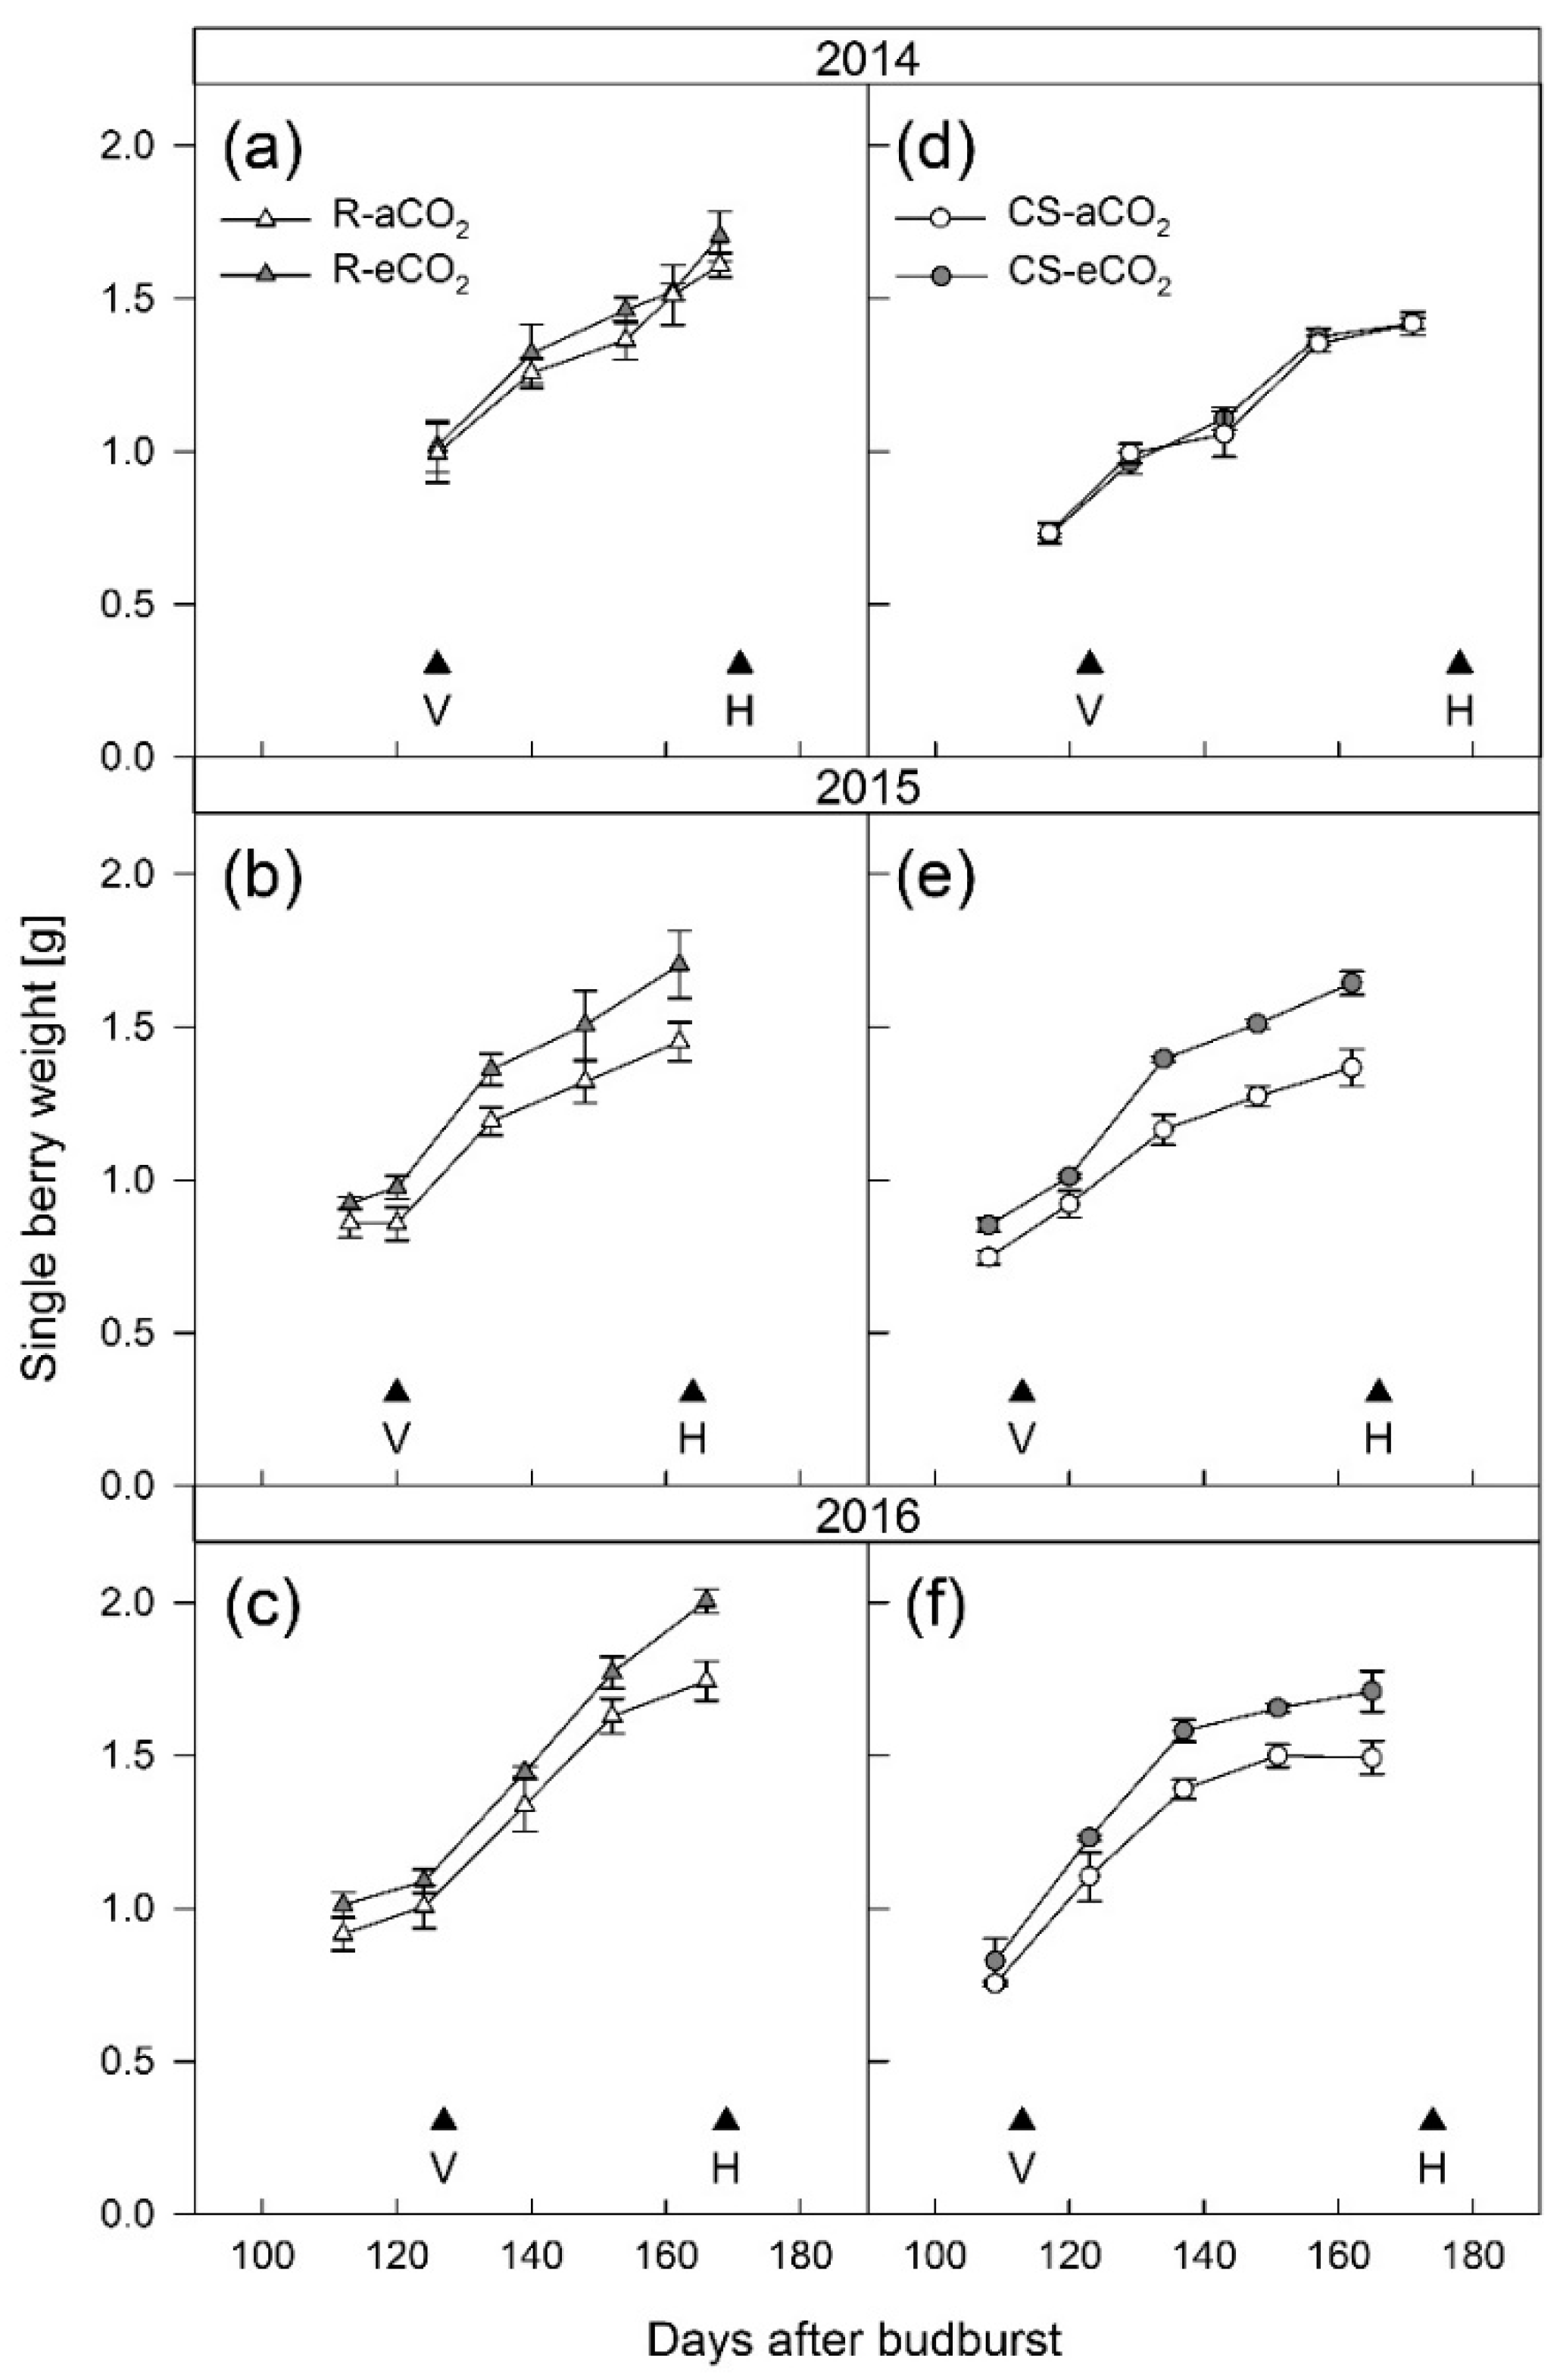 Applied Sciences | Free Full-Text | The Effect of Elevated CO2 on Berry  Development and Bunch Structure of Vitis vinifera L. cvs. Riesling and  Cabernet Sauvignon